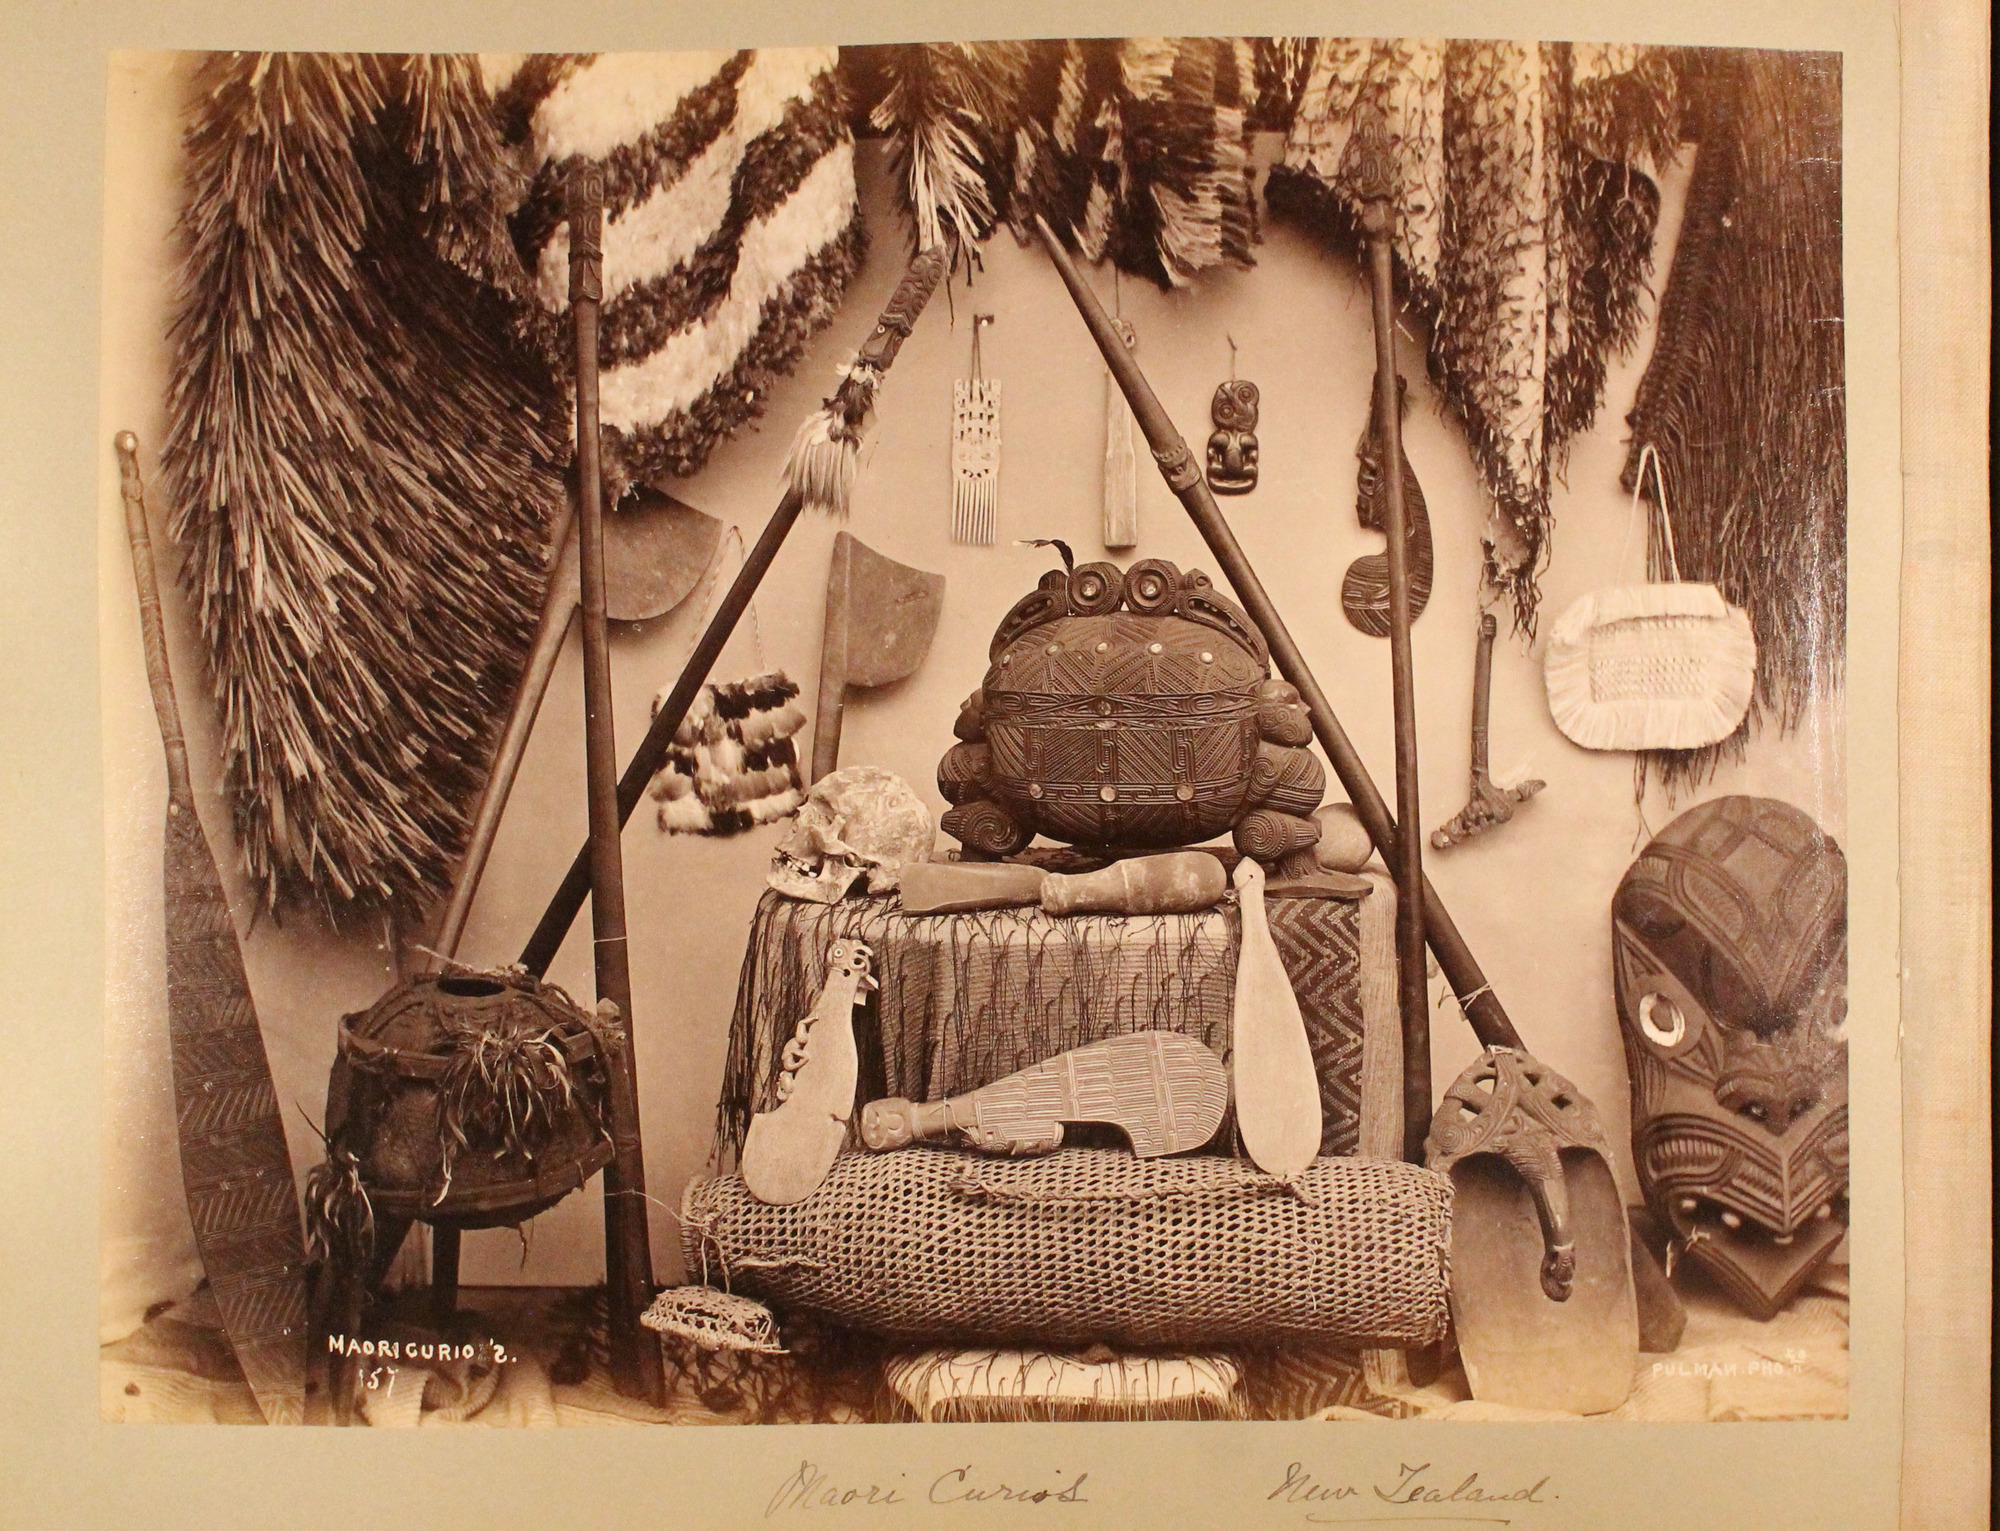 An assortment of Maori artifacts:  woven fiber cloaks, bags, a skull, pounding stones, and carved wooden paddles, staffs and containers.